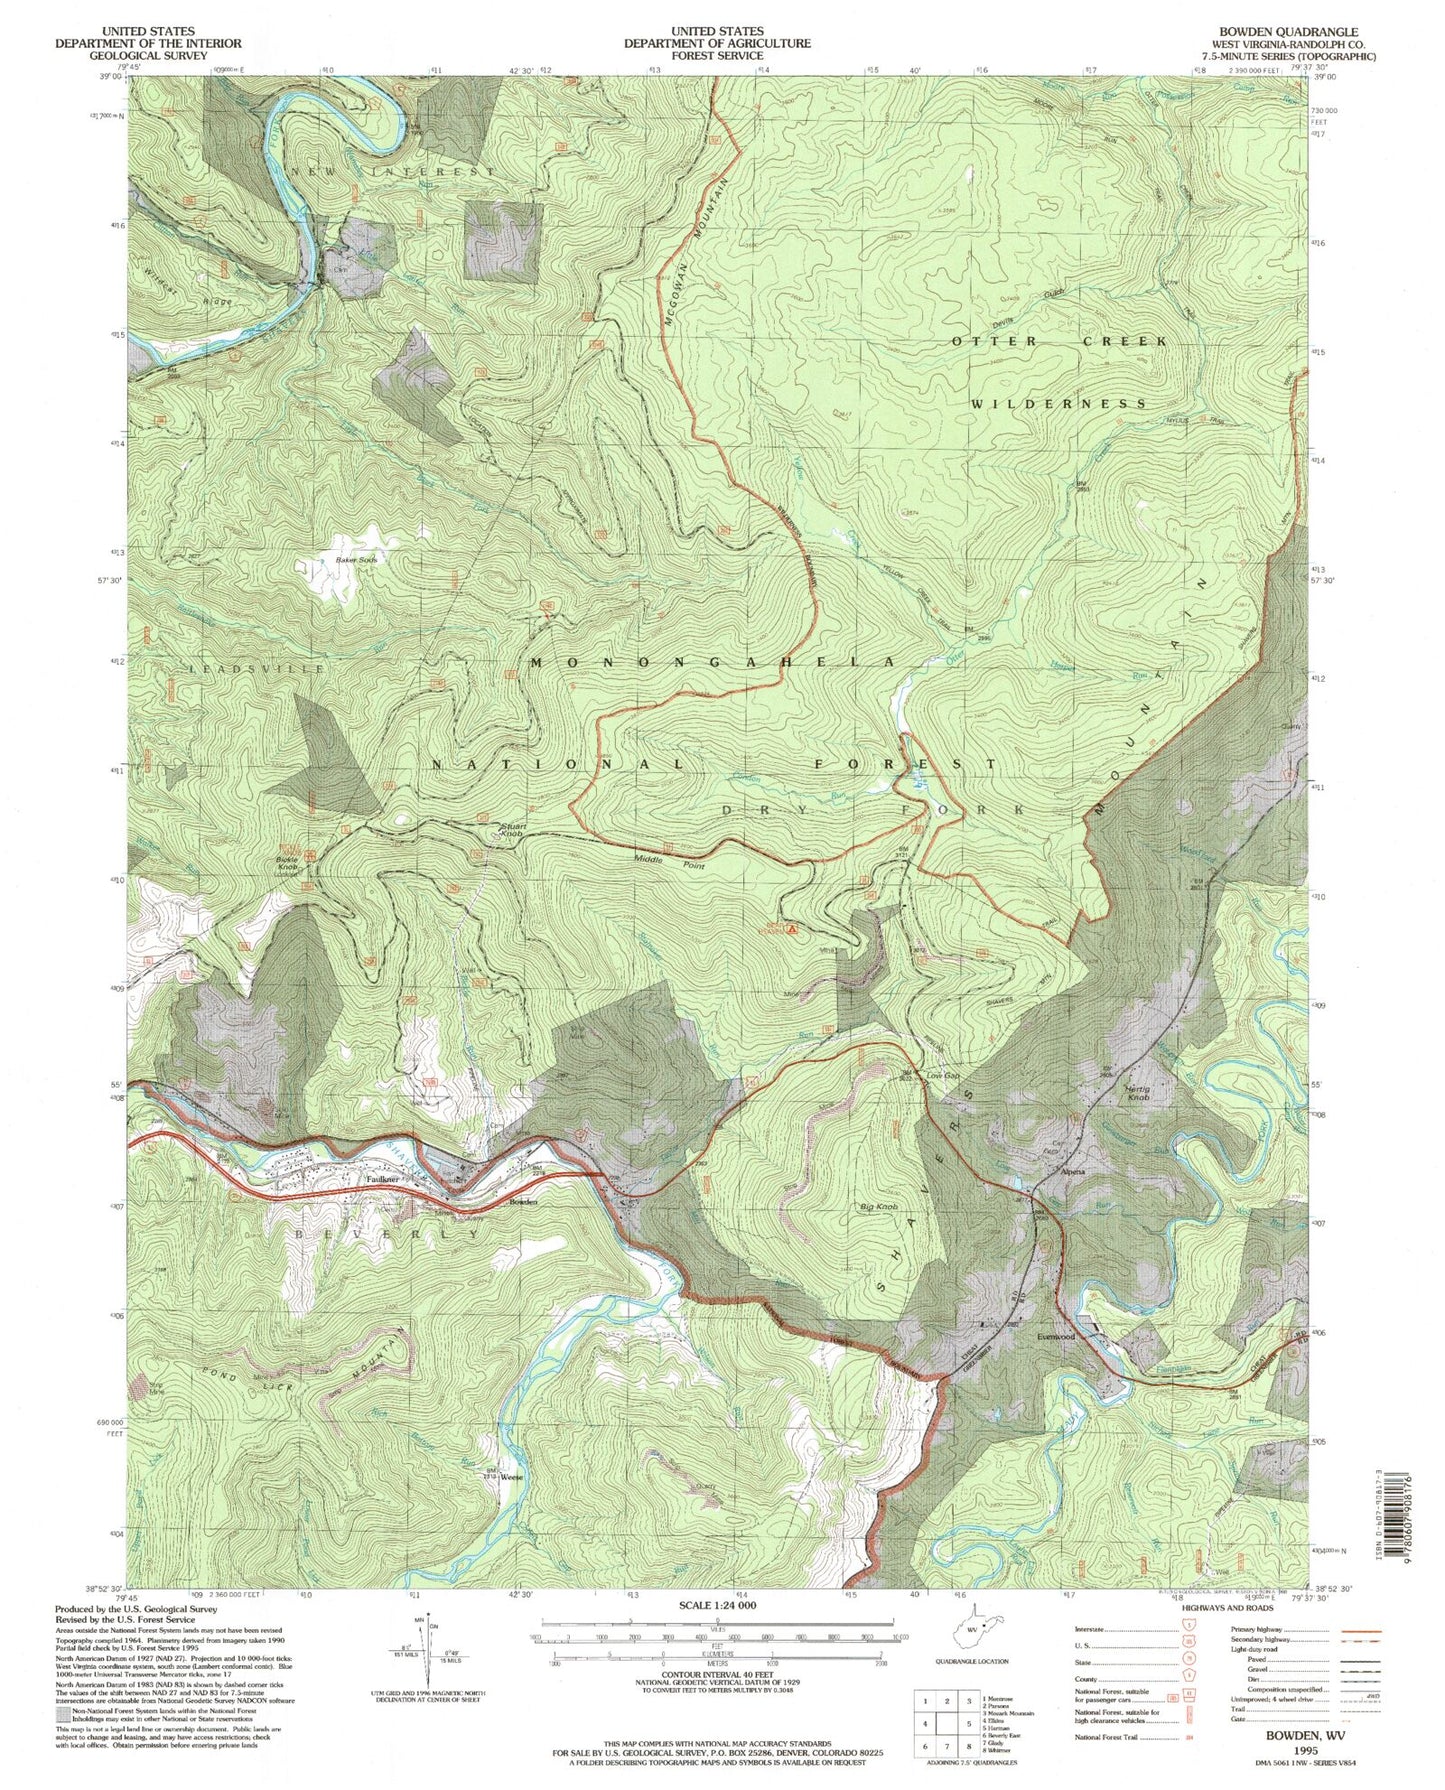 USGS Classic Bowden West Virginia 7.5'x7.5' Topo Map Image